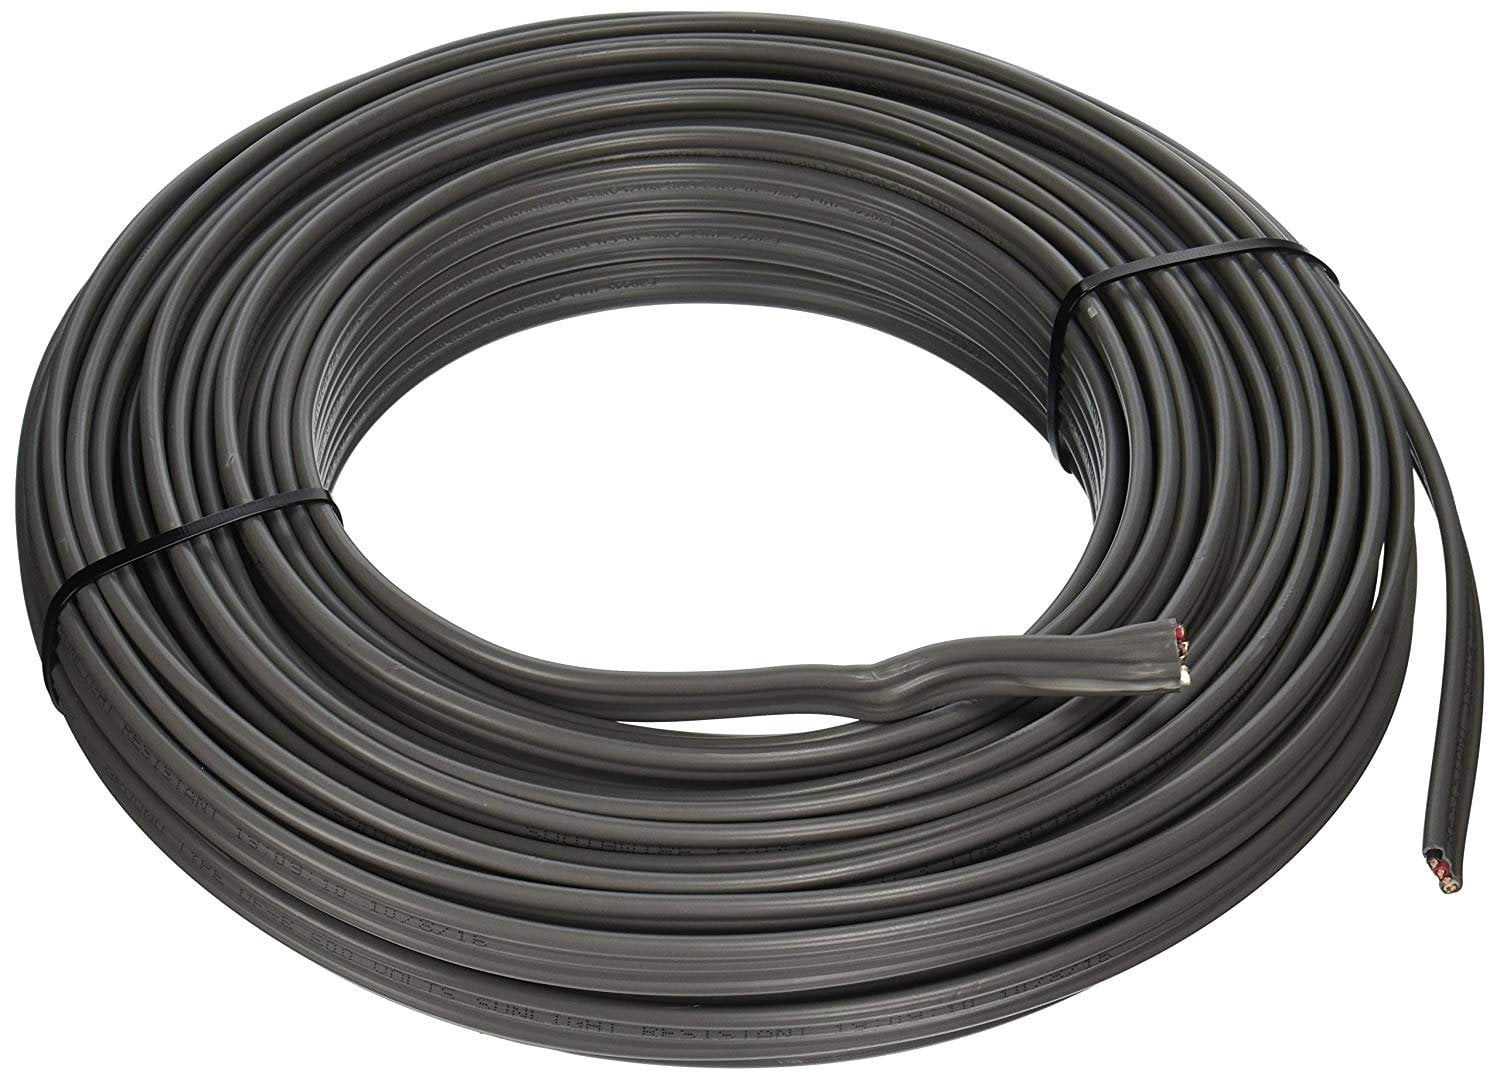 NEW 100' 10/3 W/GROUND NM-B ROMEX HOUSE WIRE/CABLE 